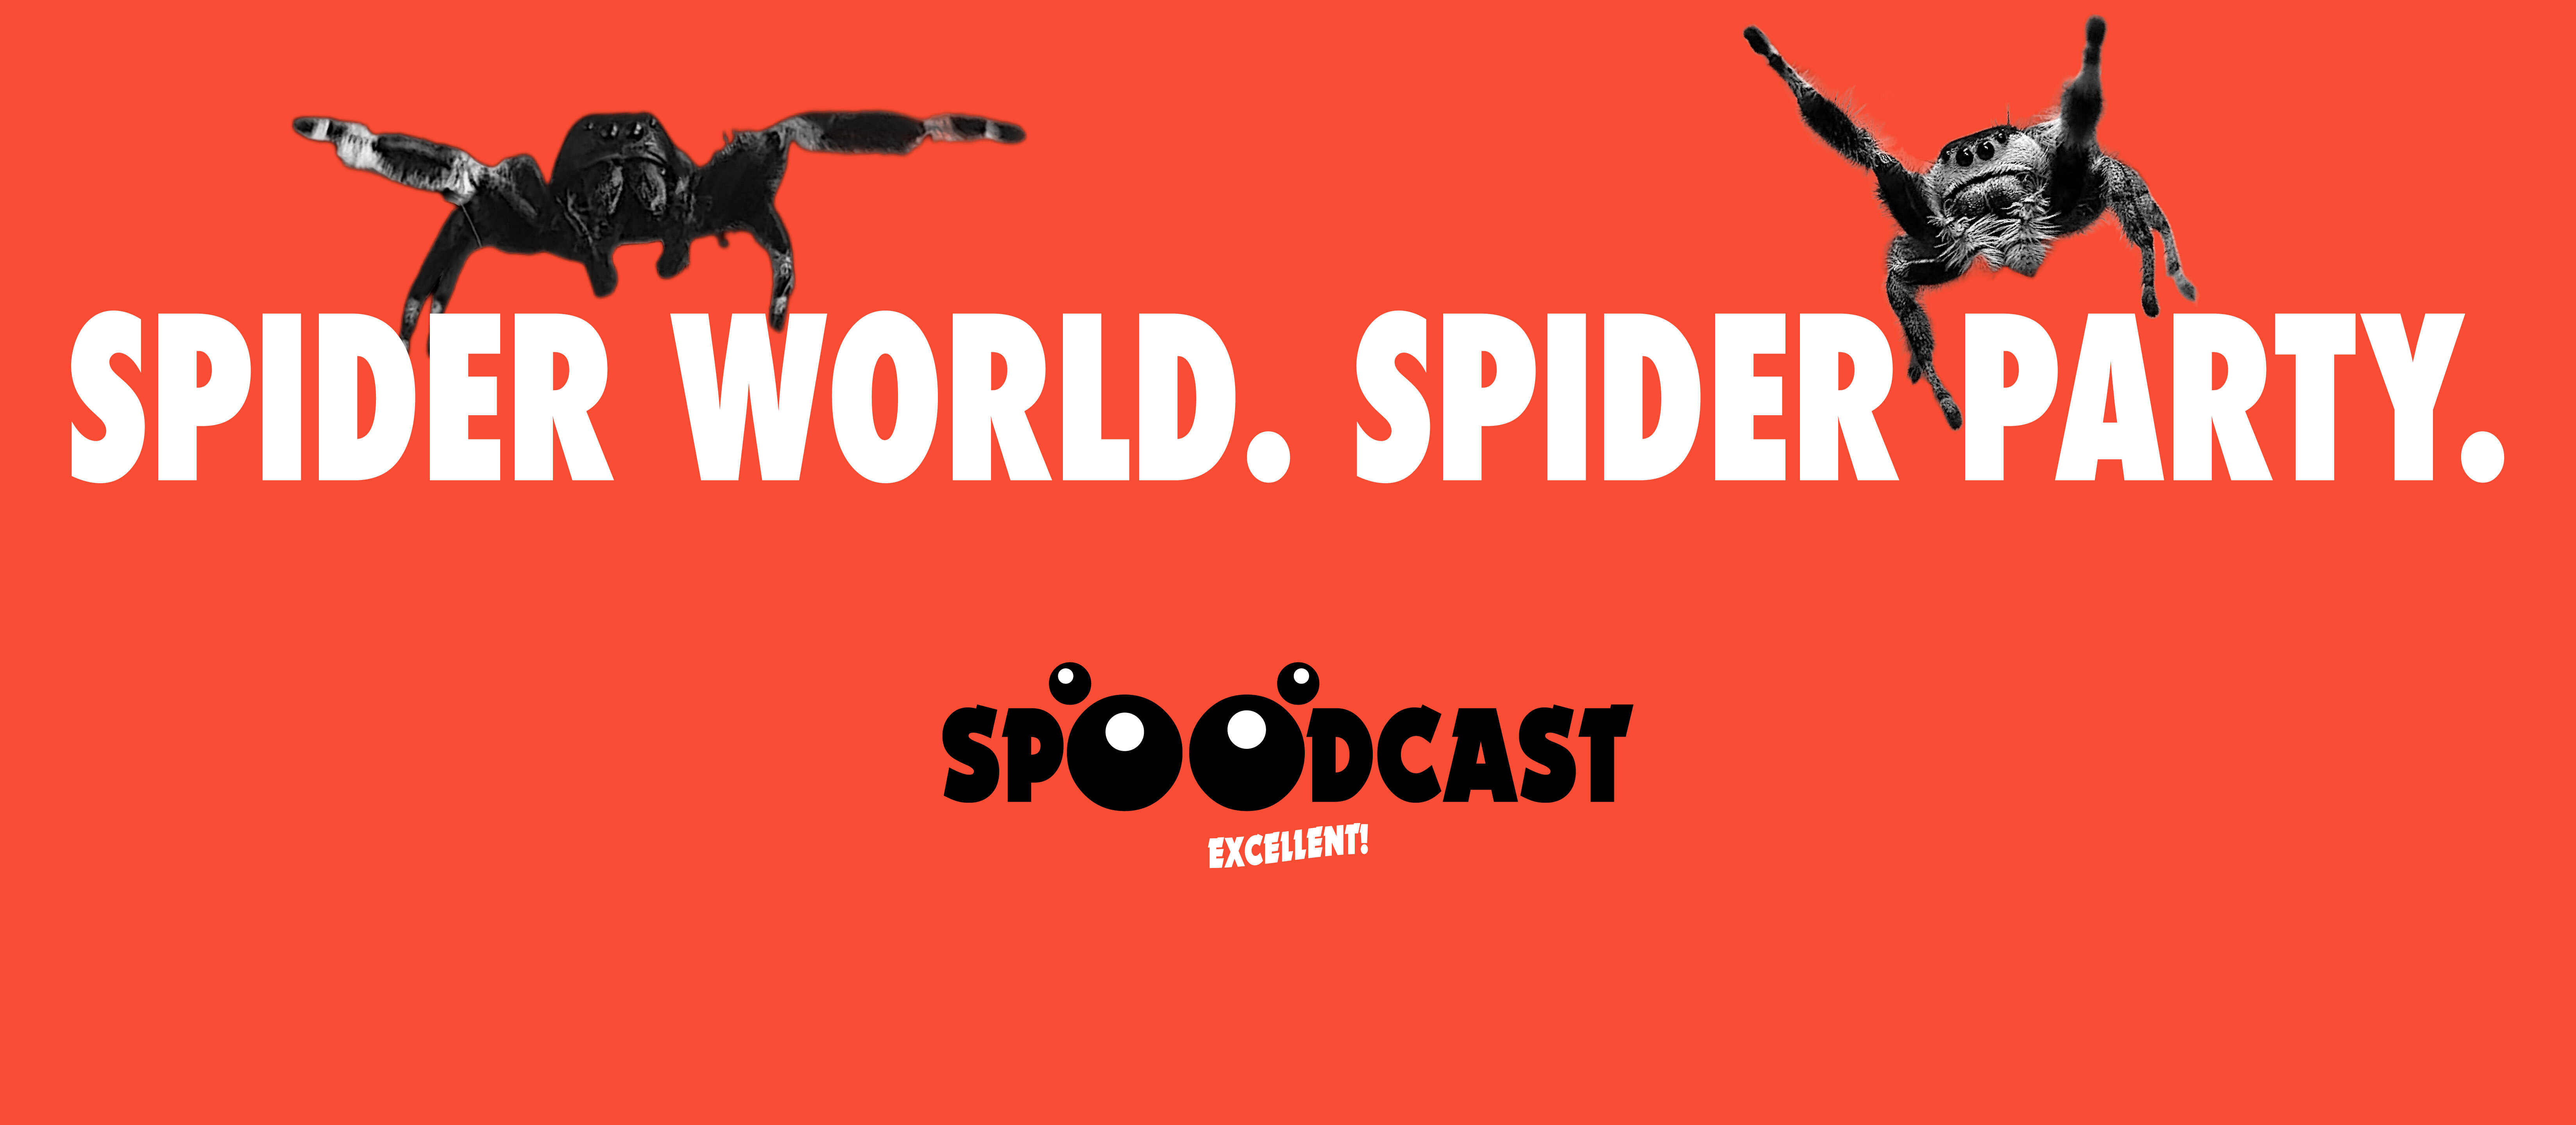 Spoodcast - Jumping Spiders, Tarantulas and Other Cool Bugs